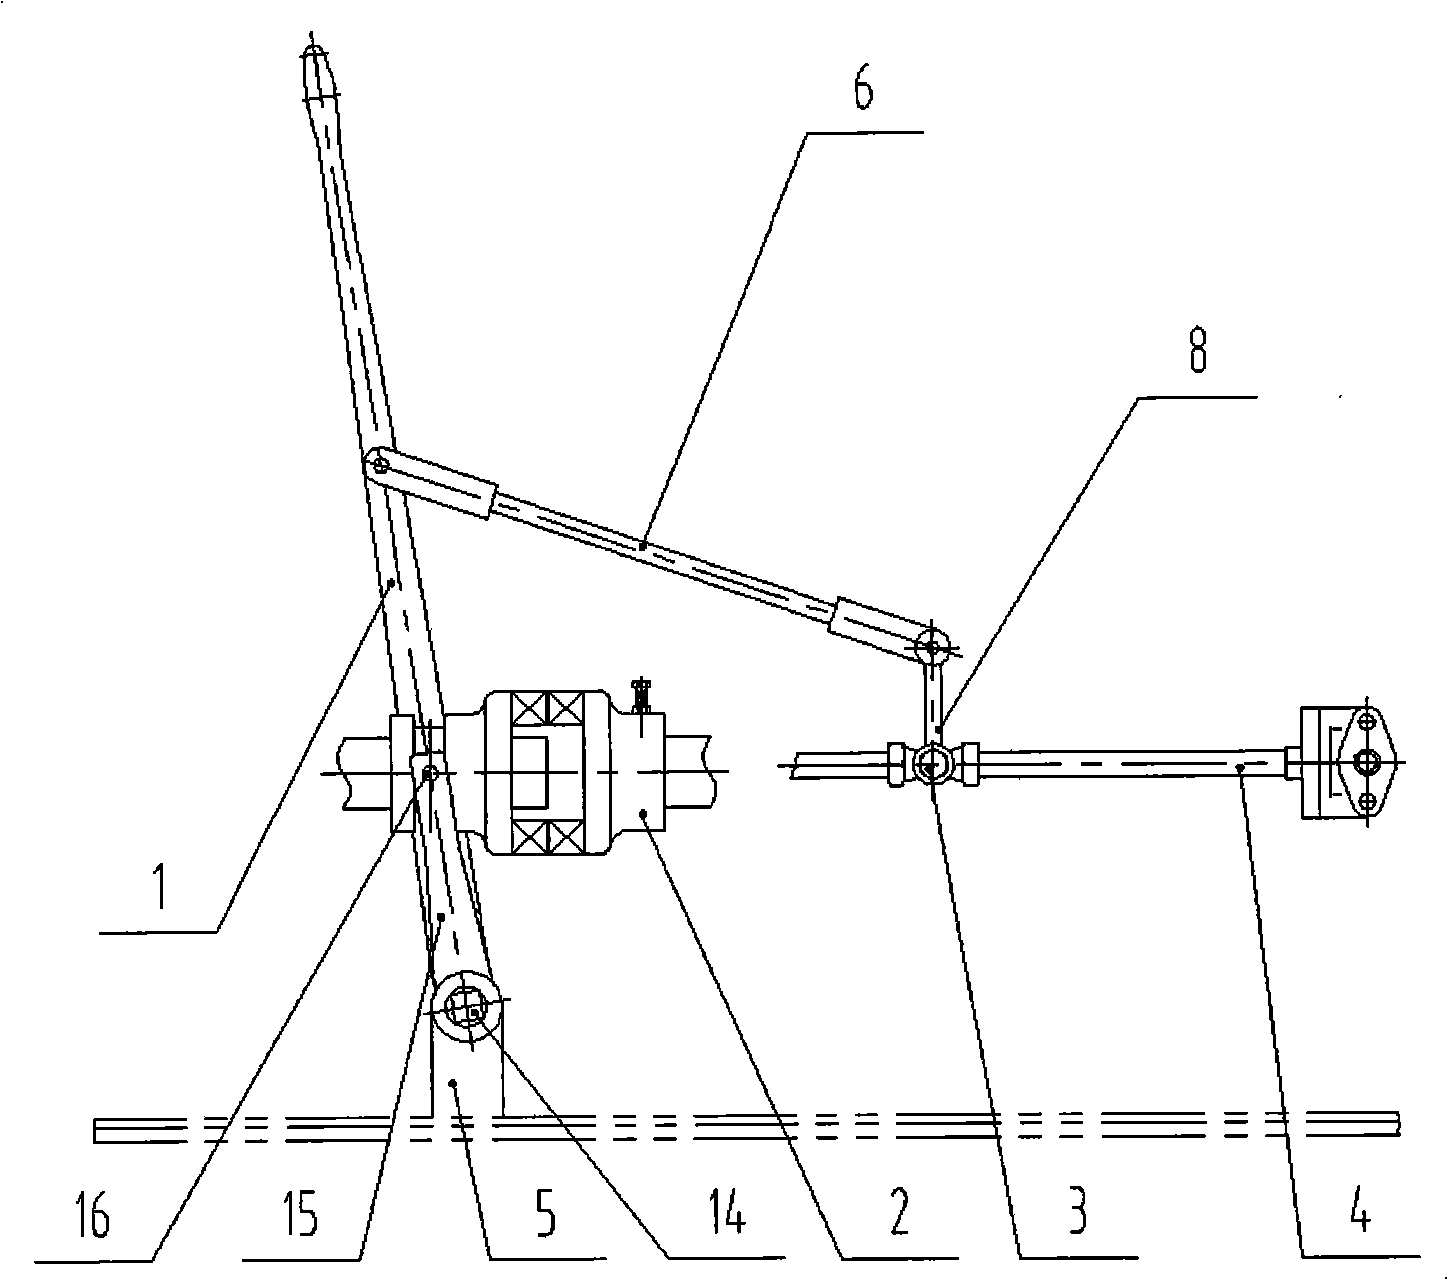 Wind power/manual linkage apparatus for discharge of railway freight transport hopper wagon